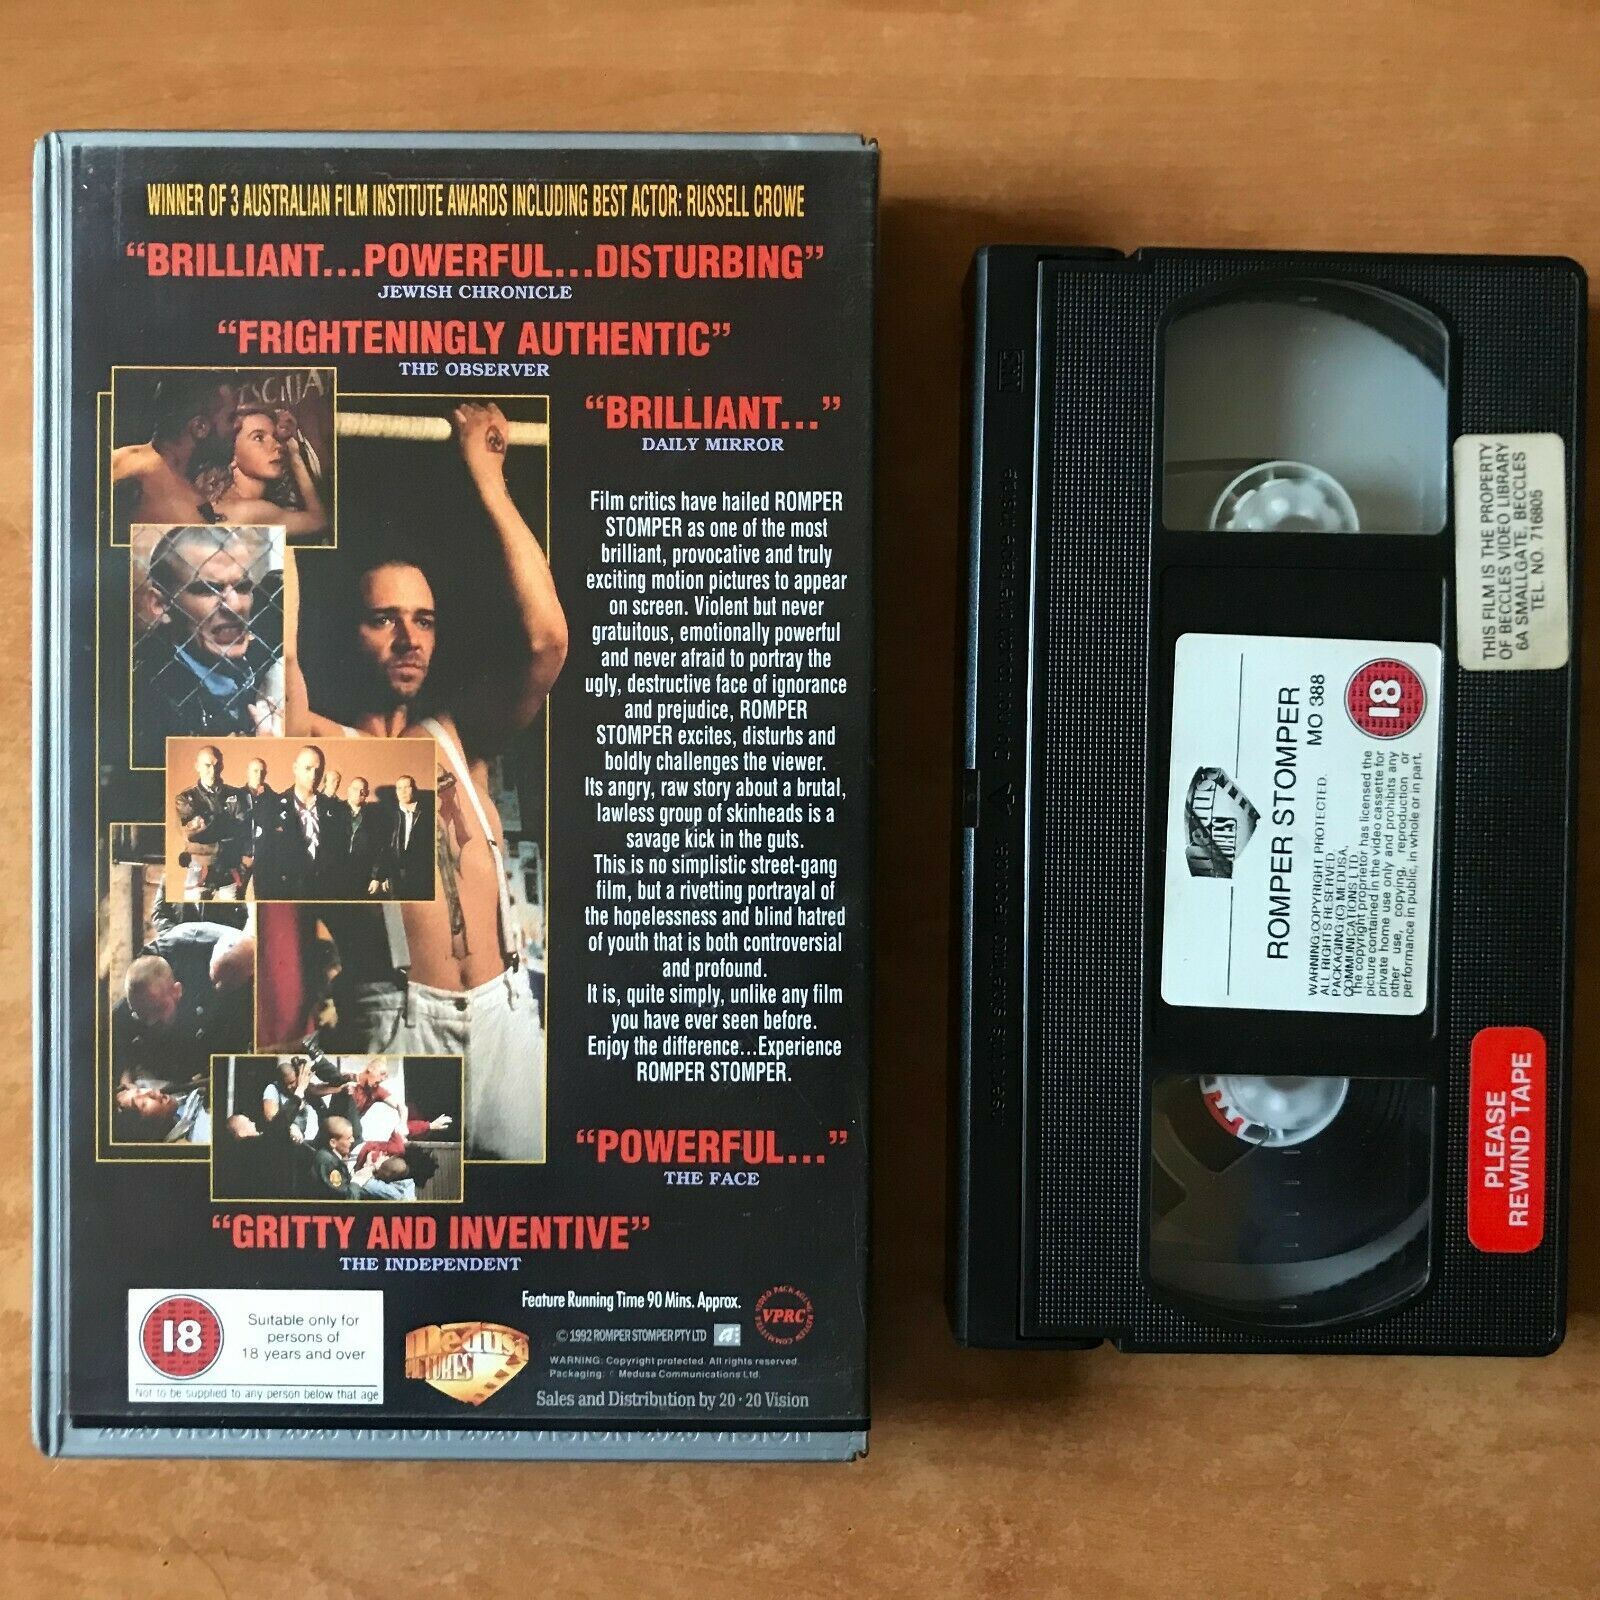 Romper Stomper; [Geoffrey Wright]: Drama - Large Box - Russell Crowe - Pal VHS-